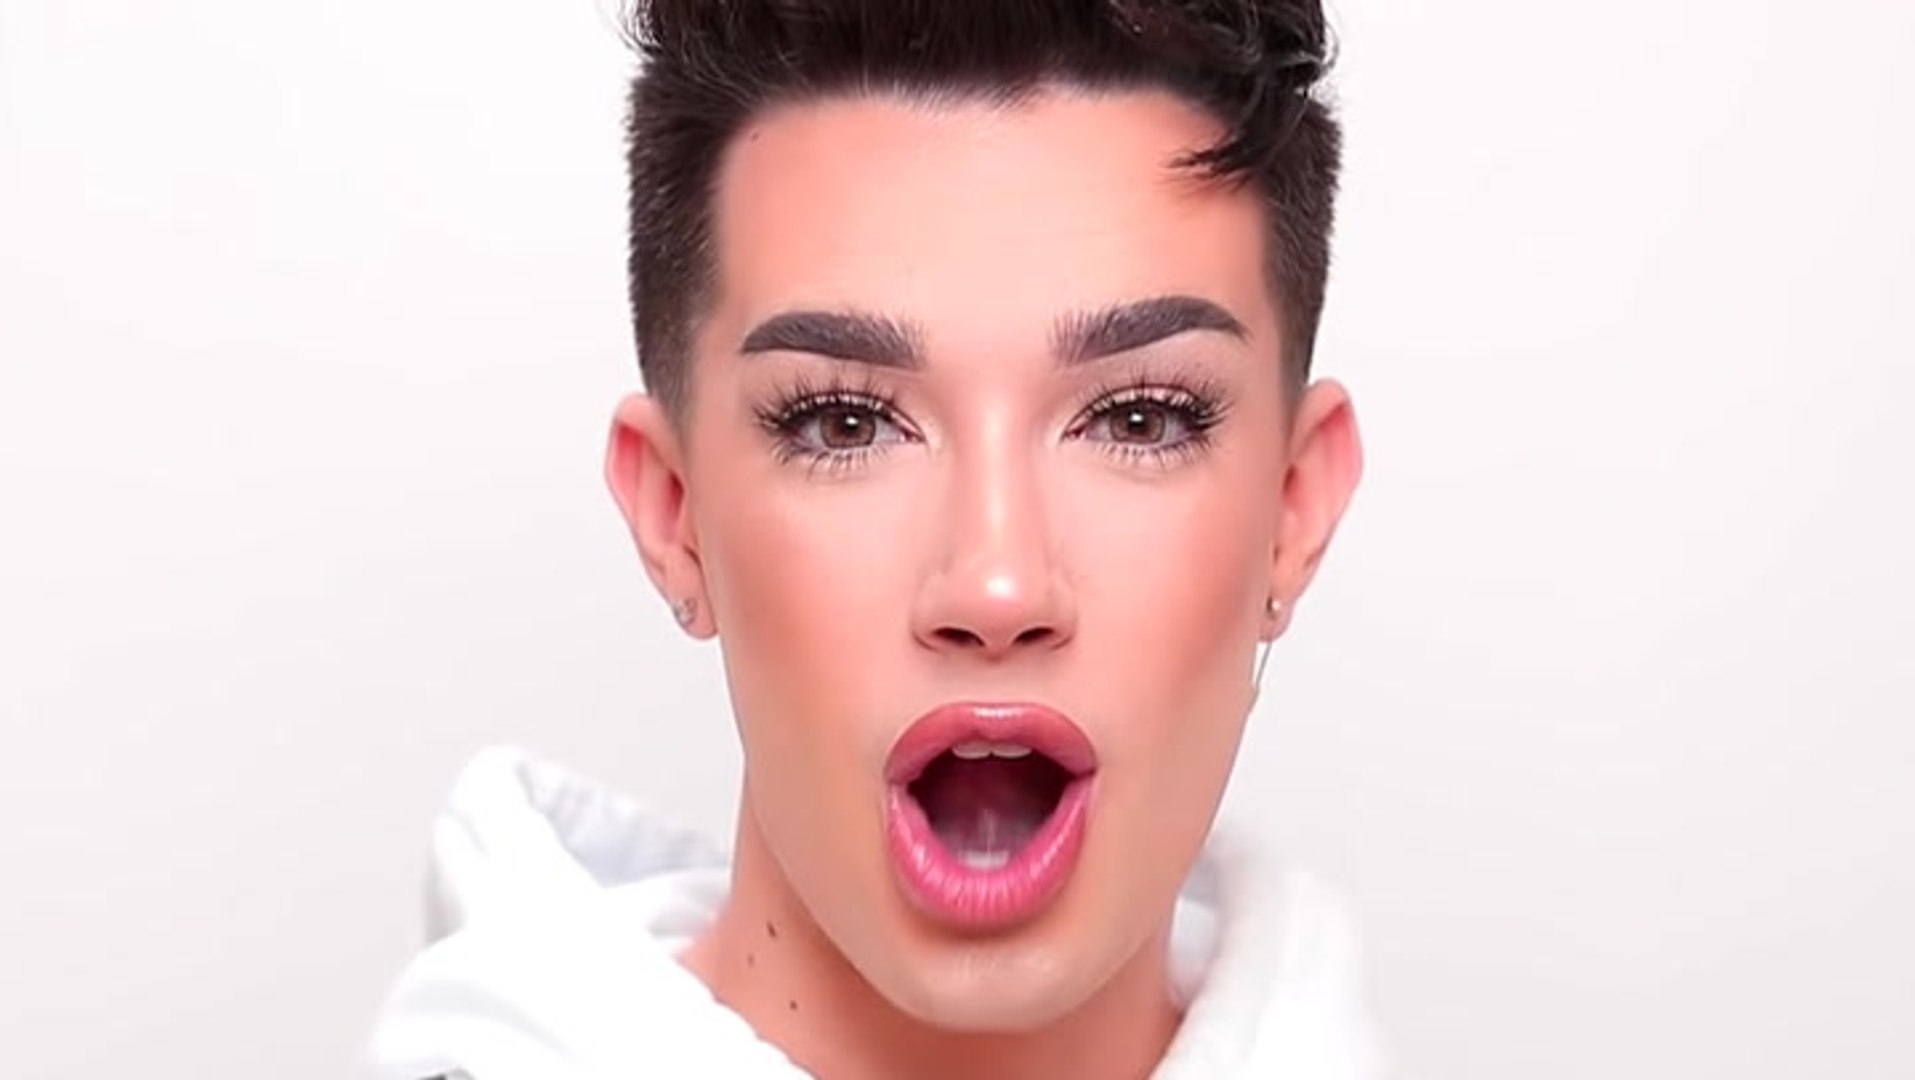 James Charles Reacts To Private Video Going Viral After